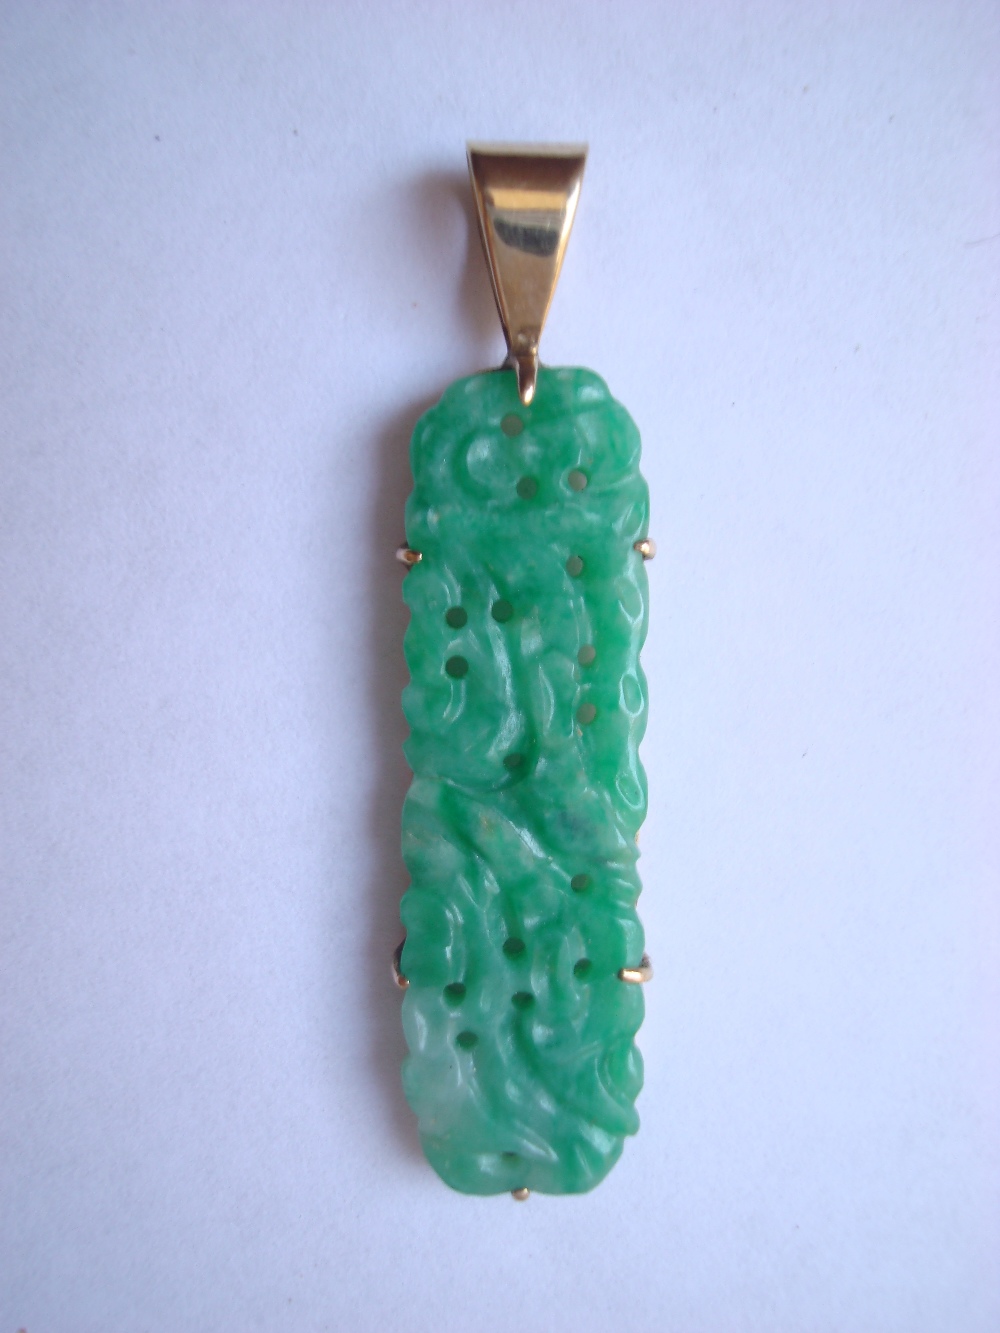 Yellow gold mounted carved and pierced jade pendant.